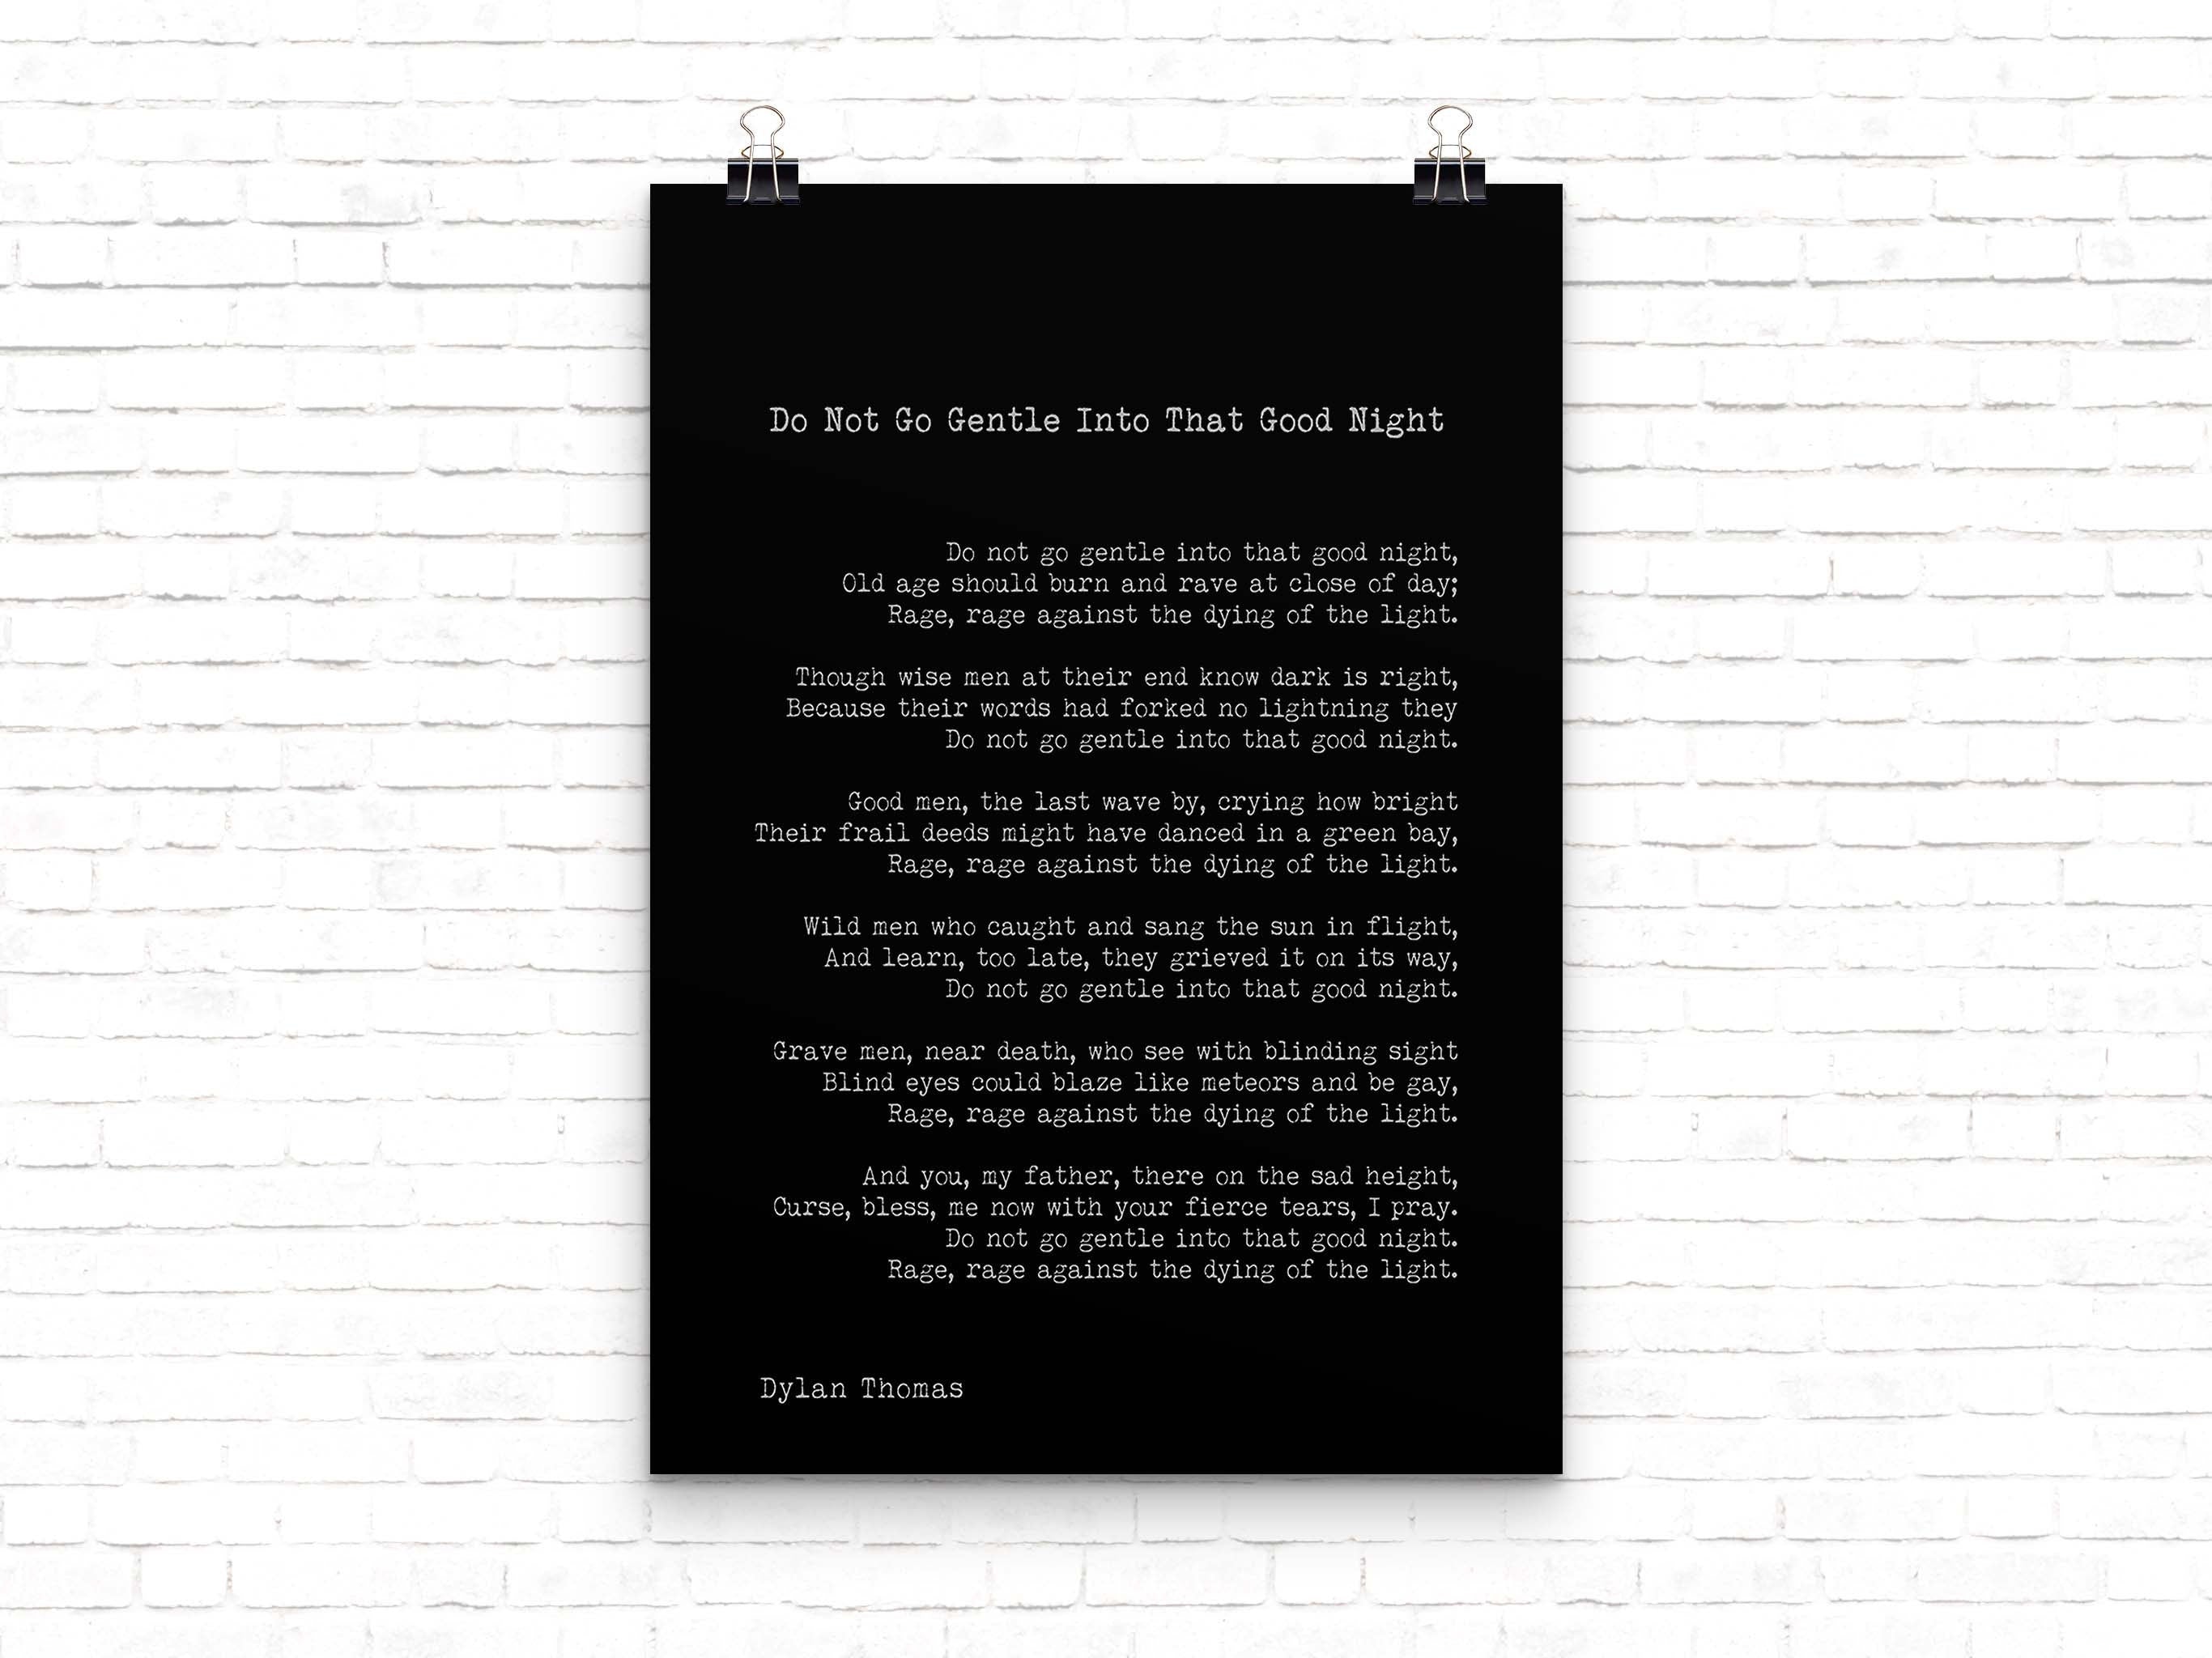 Dylan Thomas Poem Print, Do Not Go Gentle Into That Good Night Poetry Poster in Black & White for Home Wall Decor